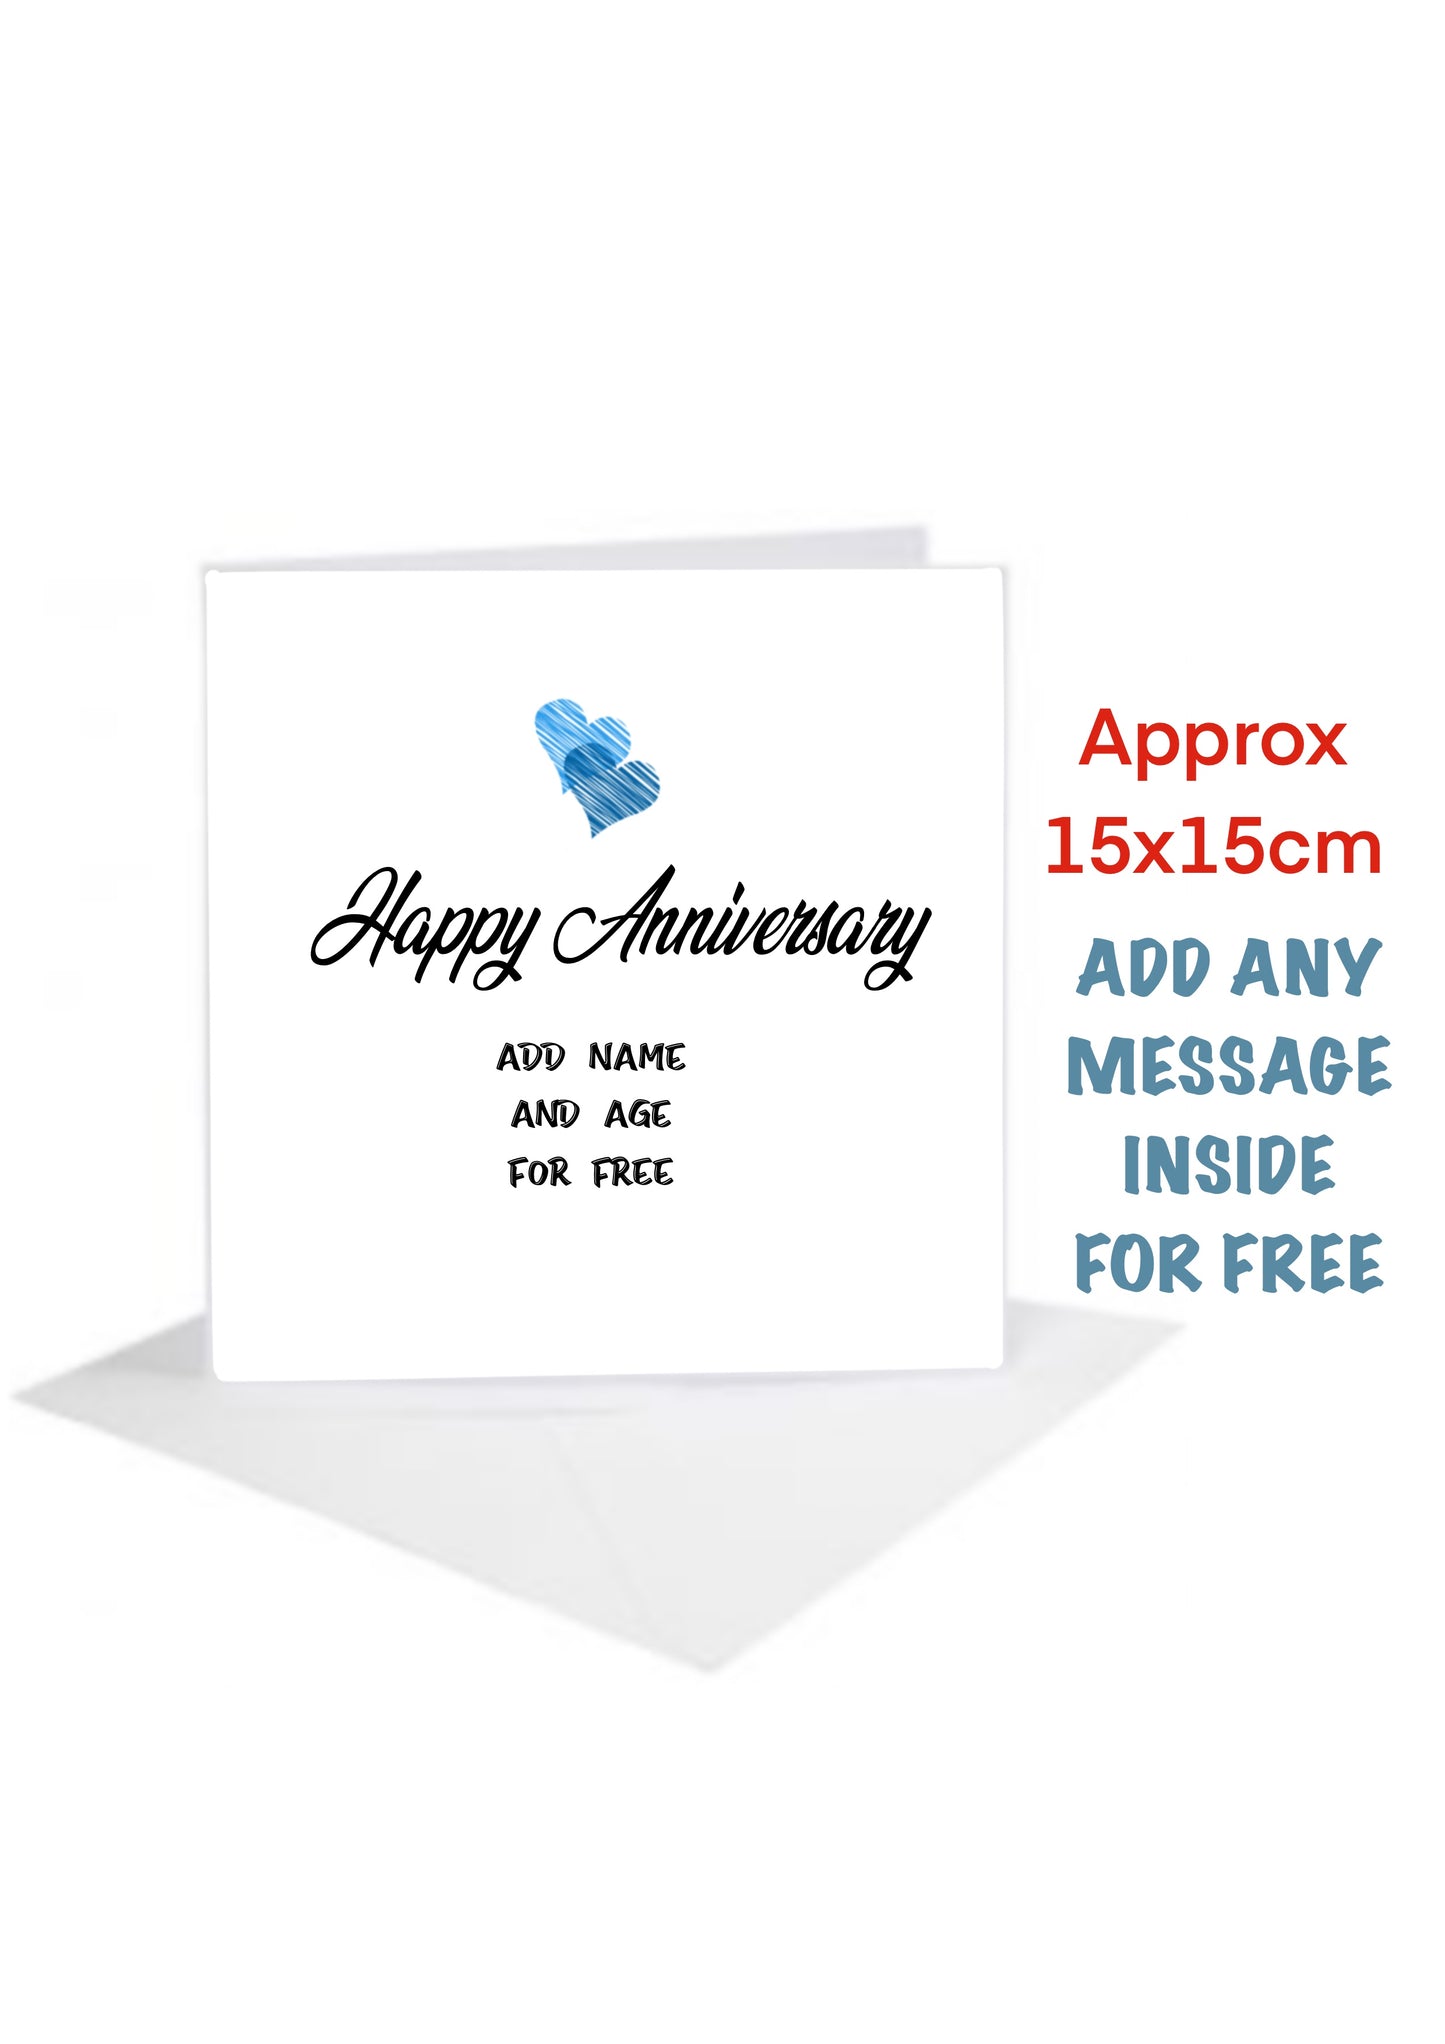 Happy Anniversaary Cards blue heart add details for FREE